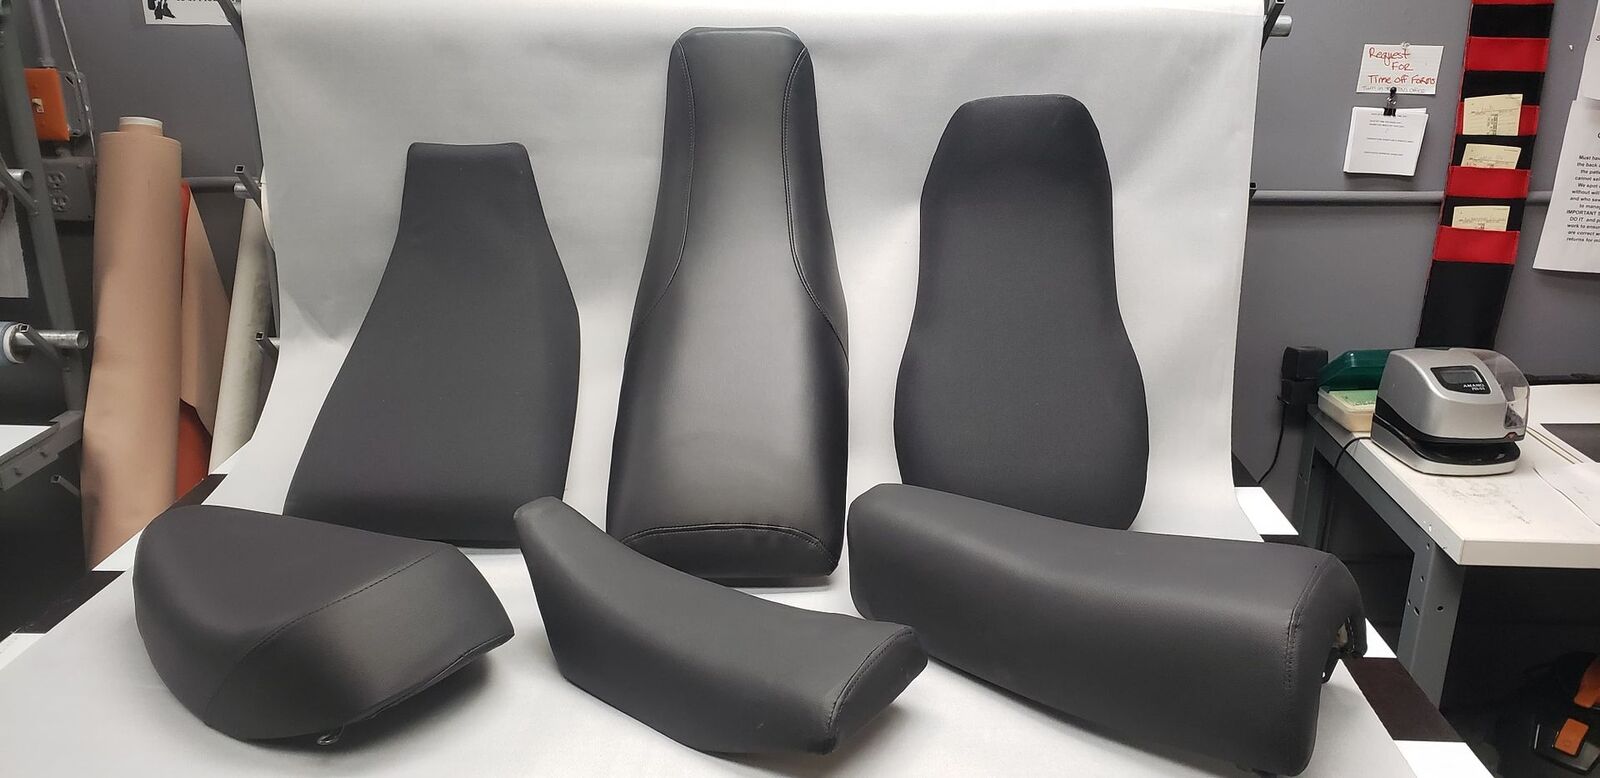 Suzuki DS 100 125 185 Seat Cover For 1980 To 1981 Models